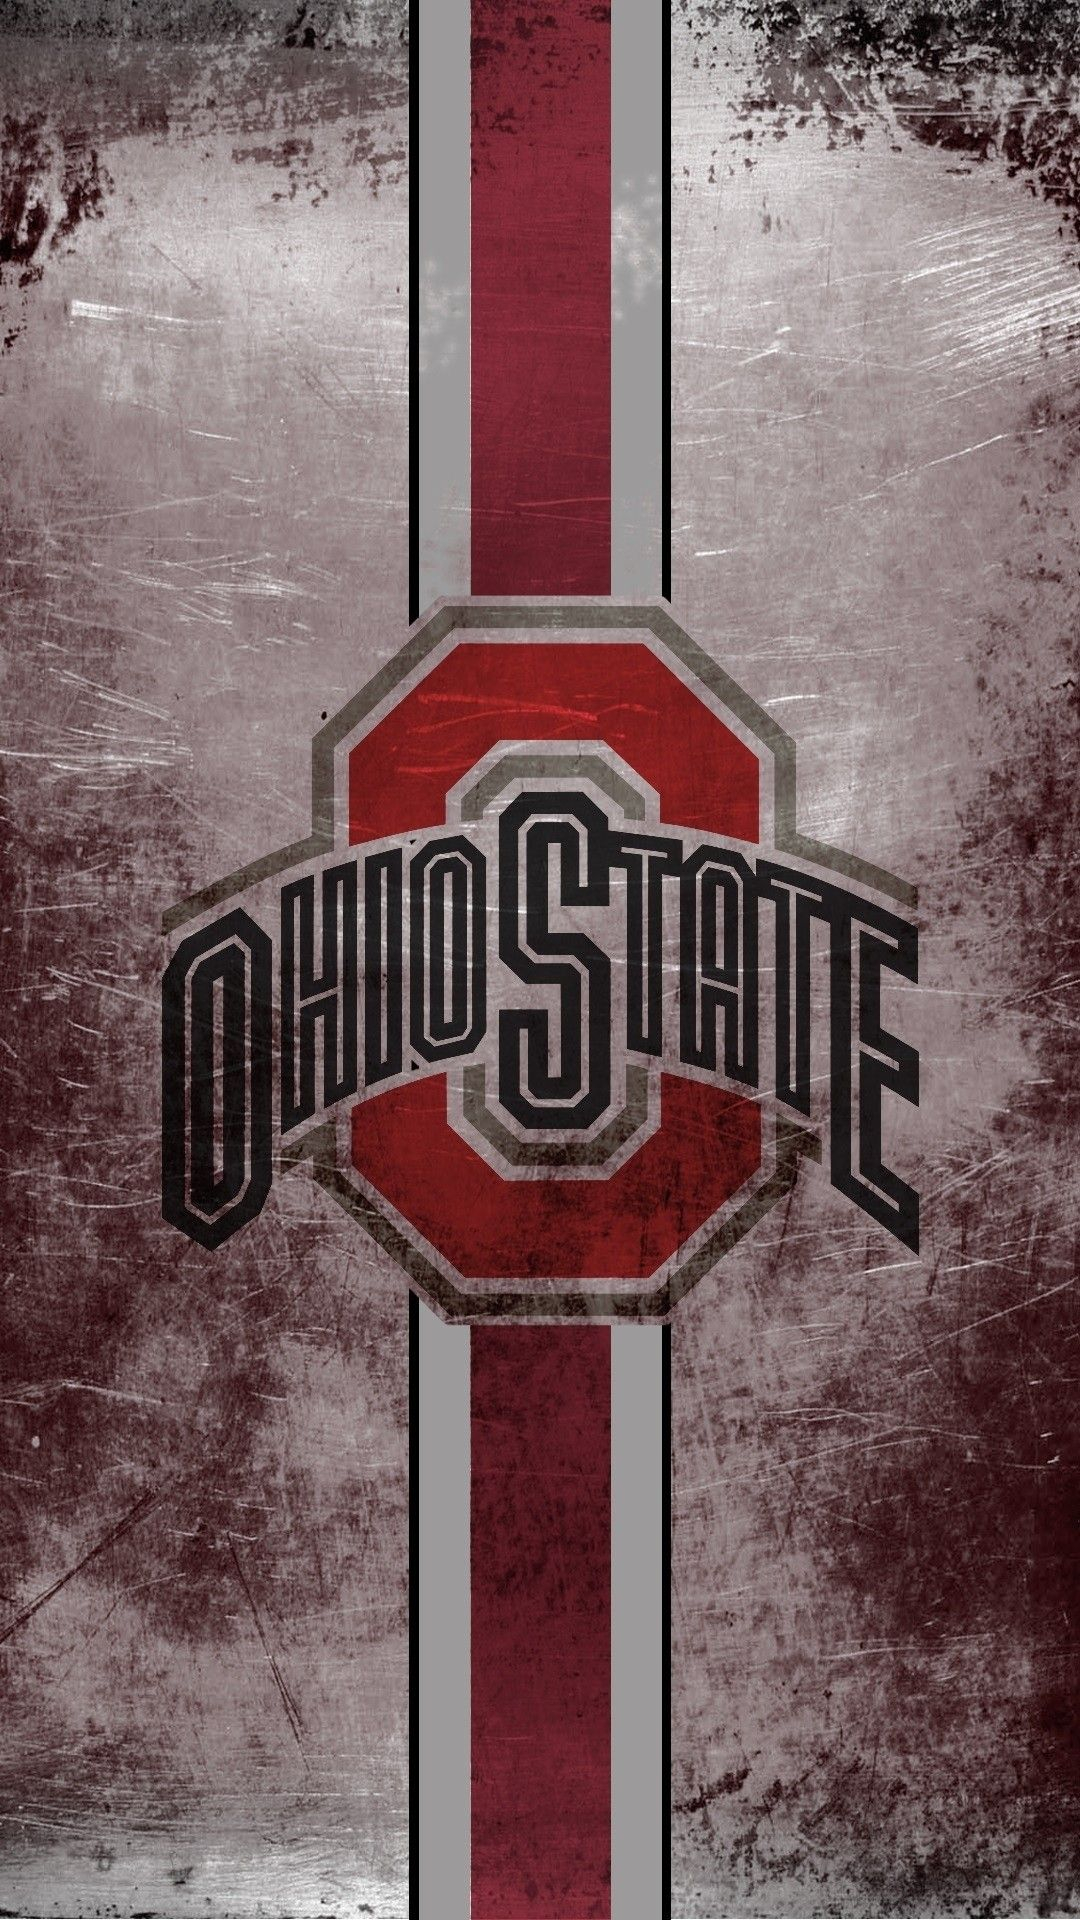 1080x1920 Ohio State Iphone Wallpaper Best iPhone Wallpaper | Ohio state wallpaper, Ohio state buckeyes football, Ohio state pictures